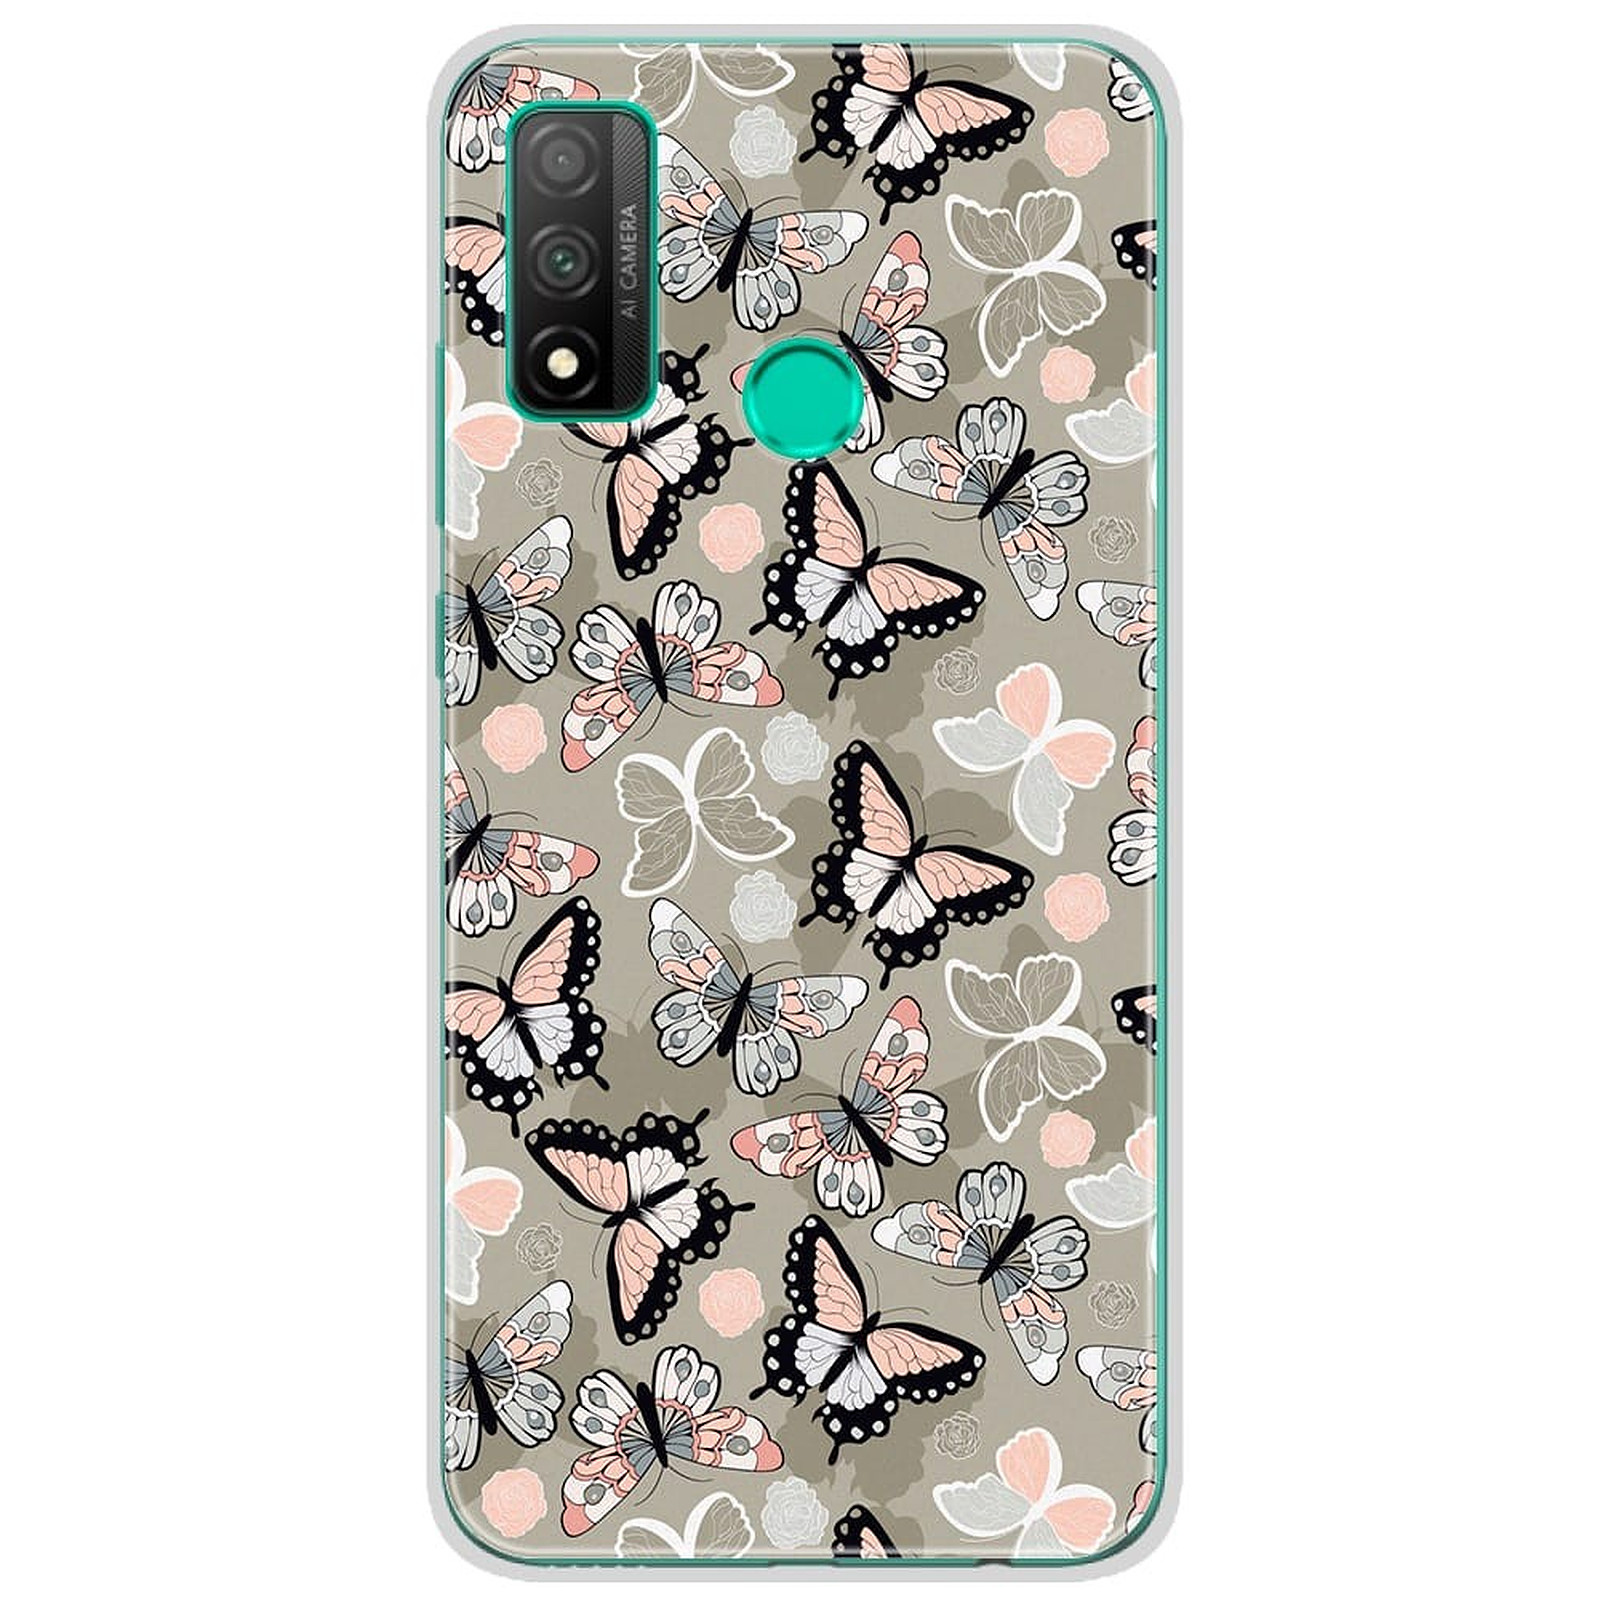 1001 Coques Coque silicone gel Huawei P Smart 2020 motif Papillons Vintage - Coque telephone 1001Coques